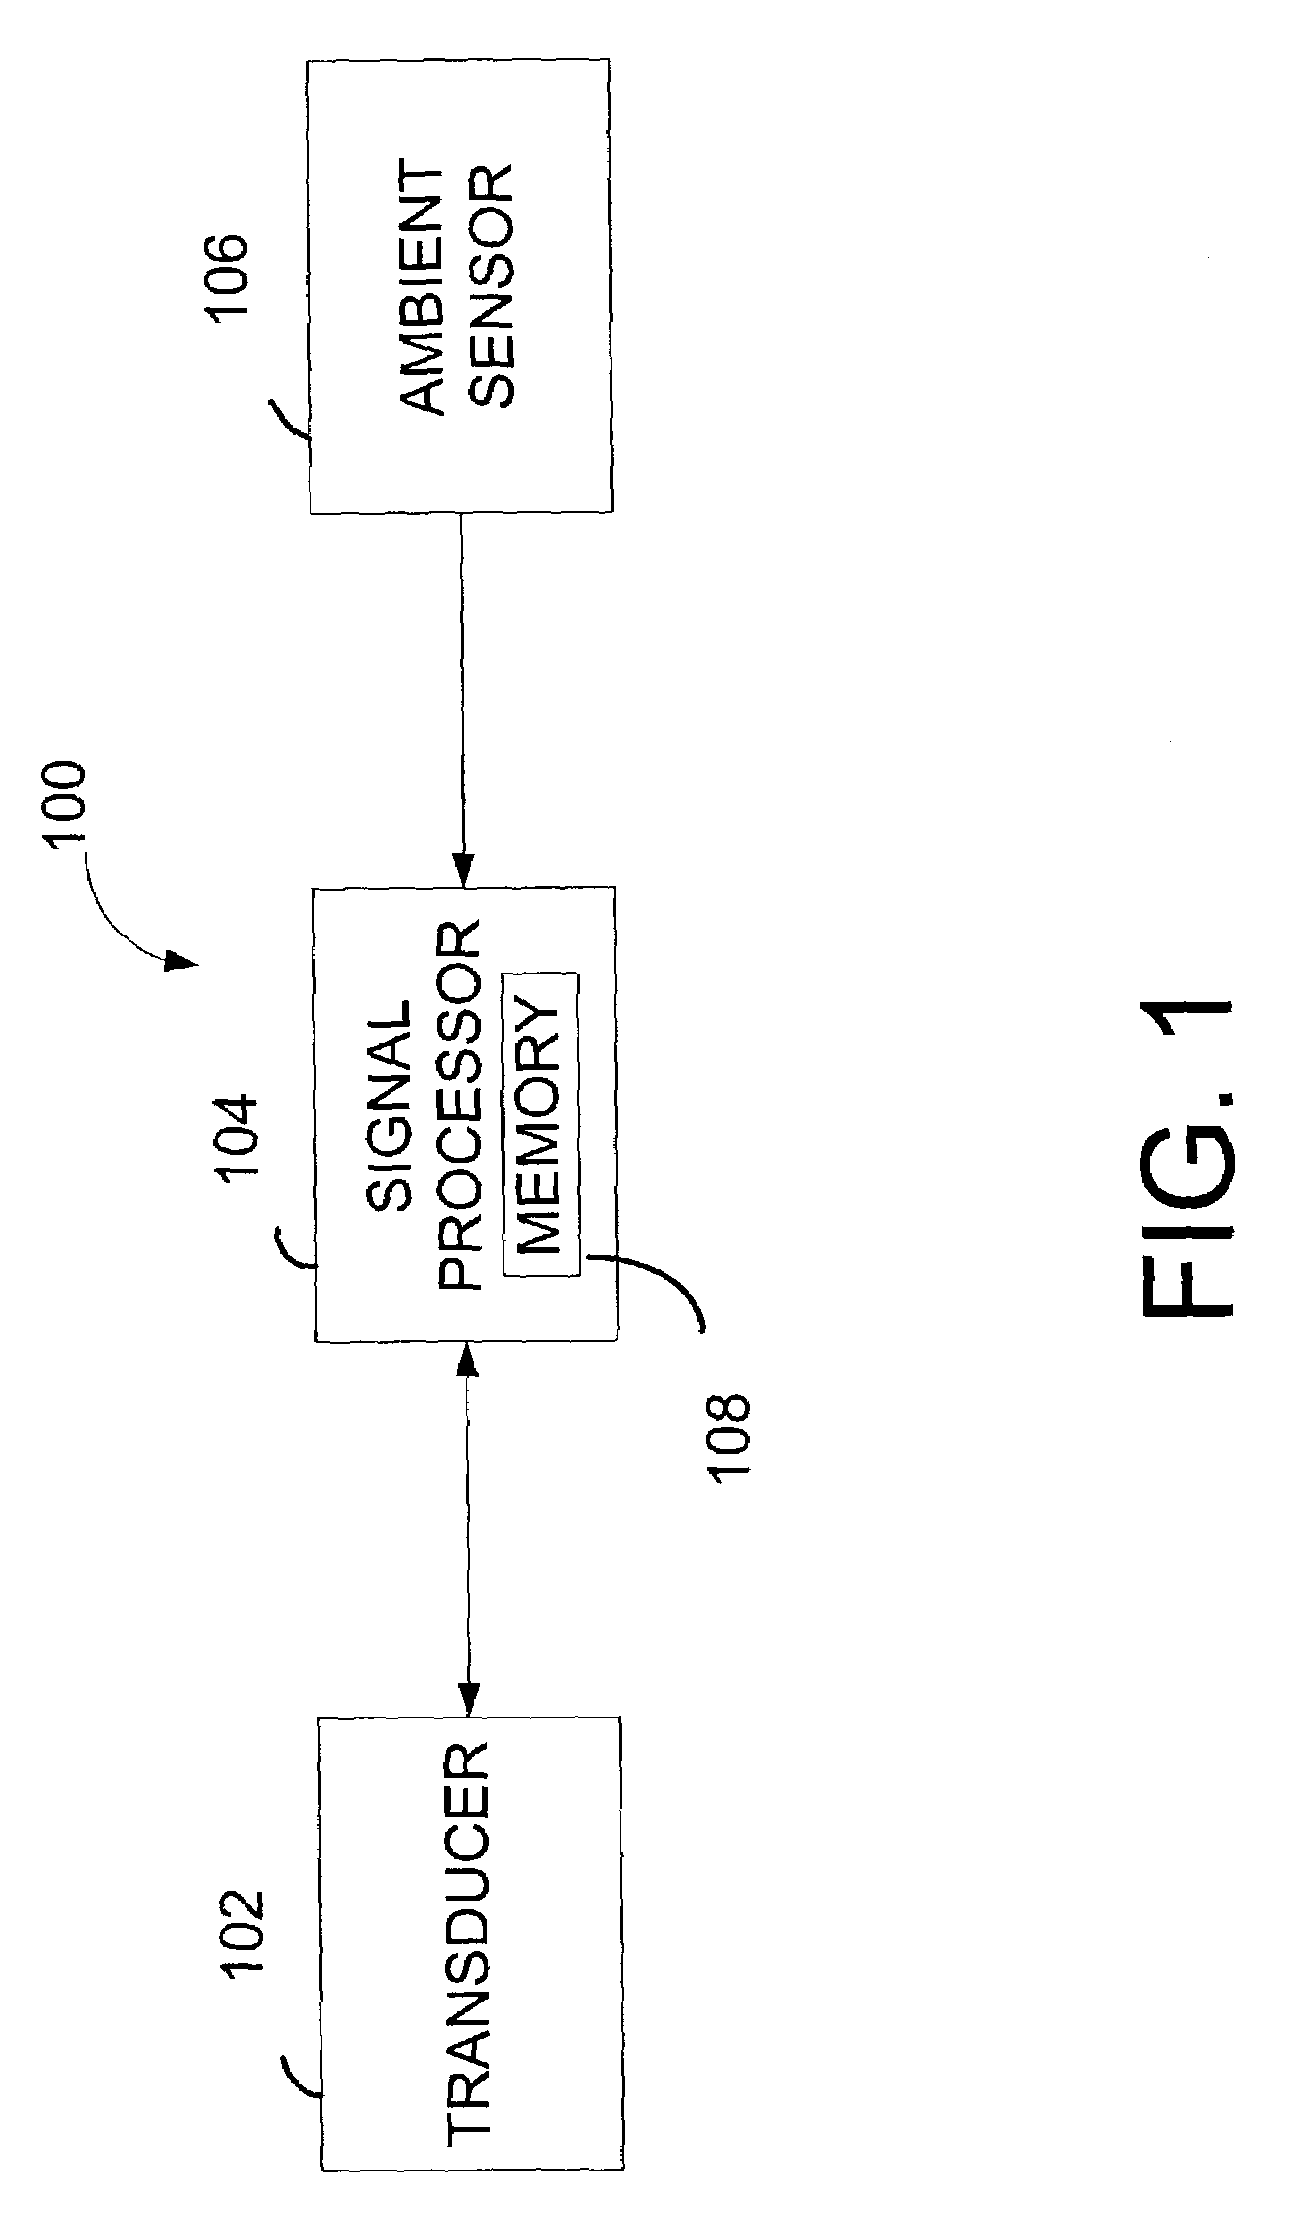 System for transducer compensation based on ambient conditions